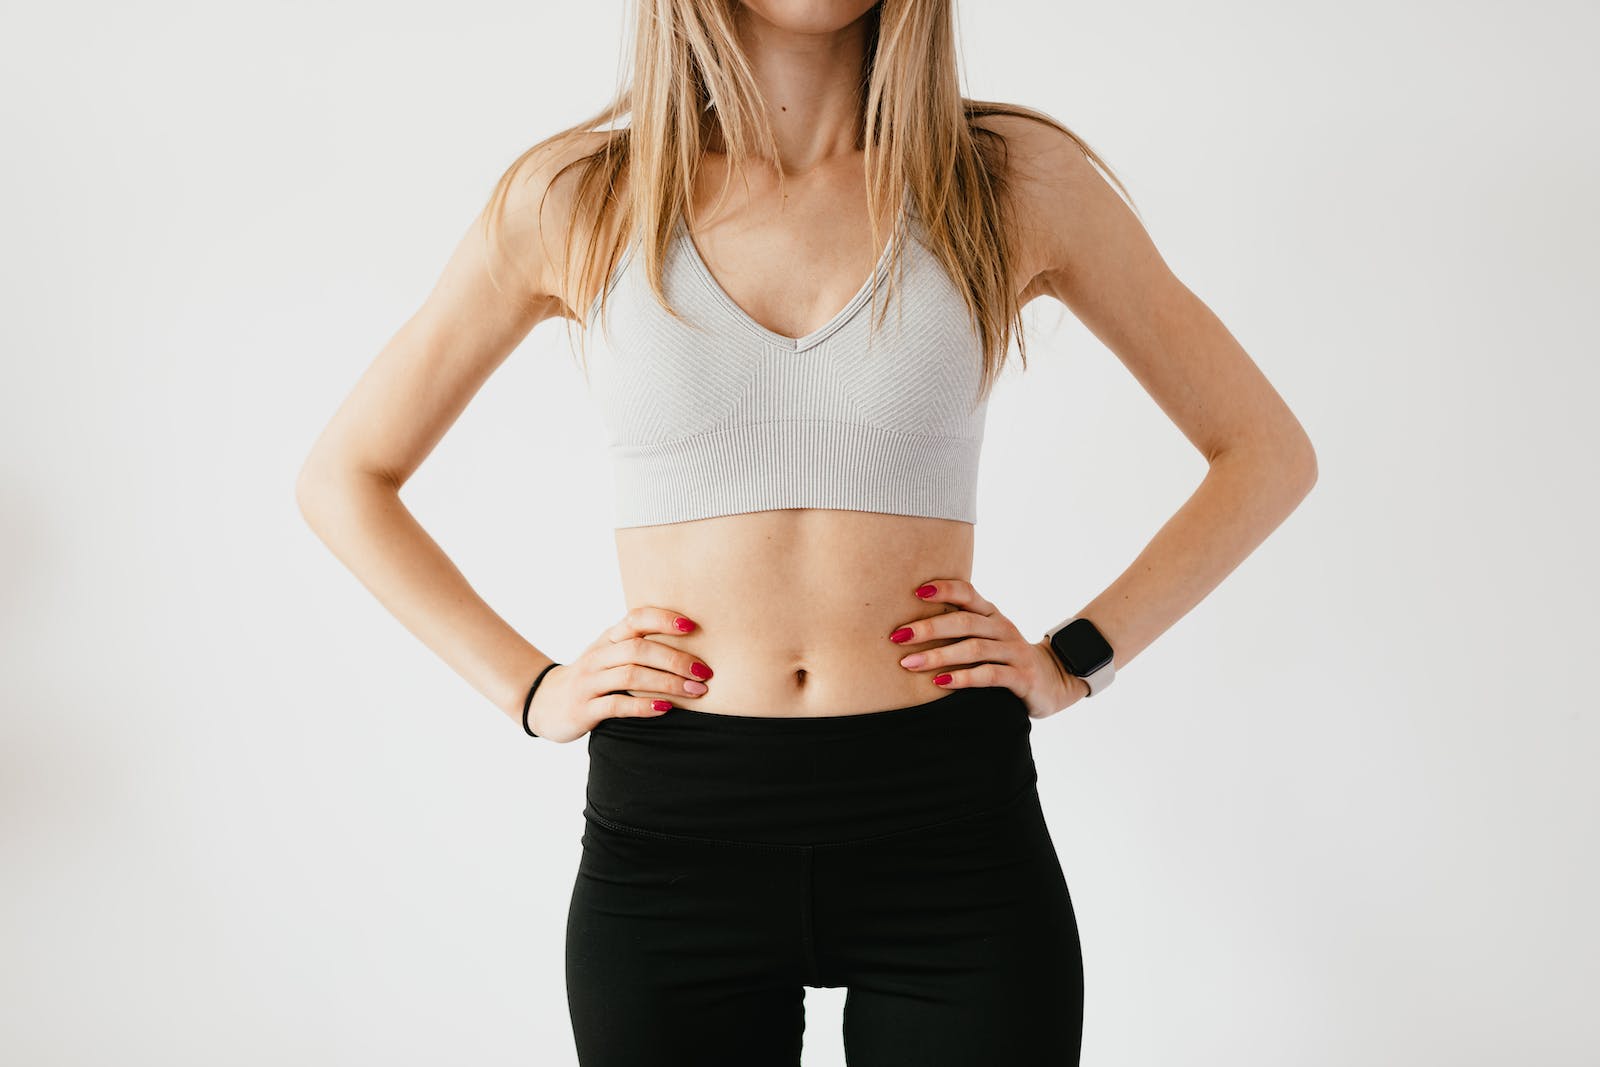 Faceless slim anonymous blond female in sports bra and black leggings in wearable bracelet showing perfect belly